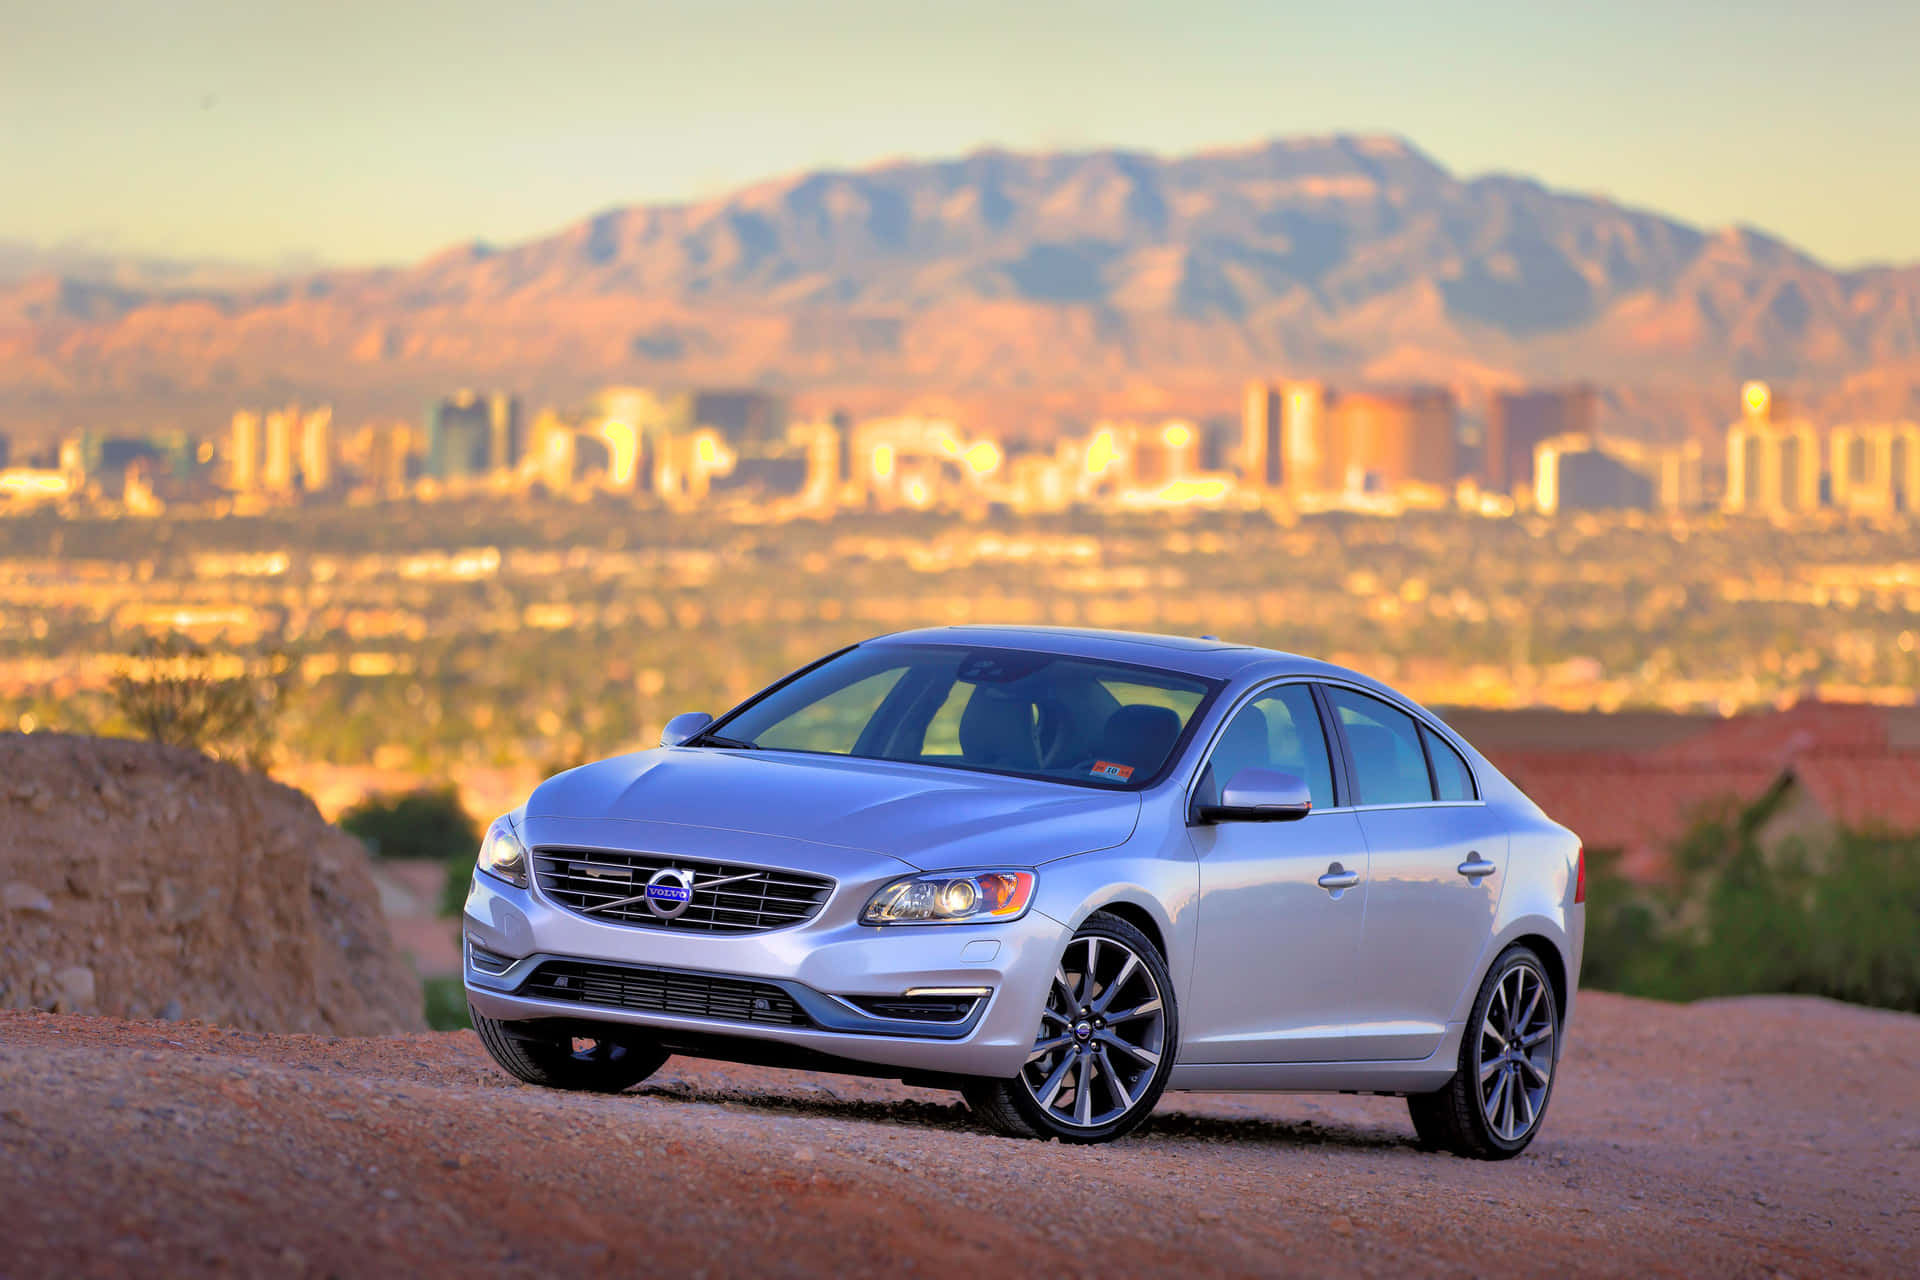 Caption: Sleek And Stylish Volvo S60 On The Highway Wallpaper